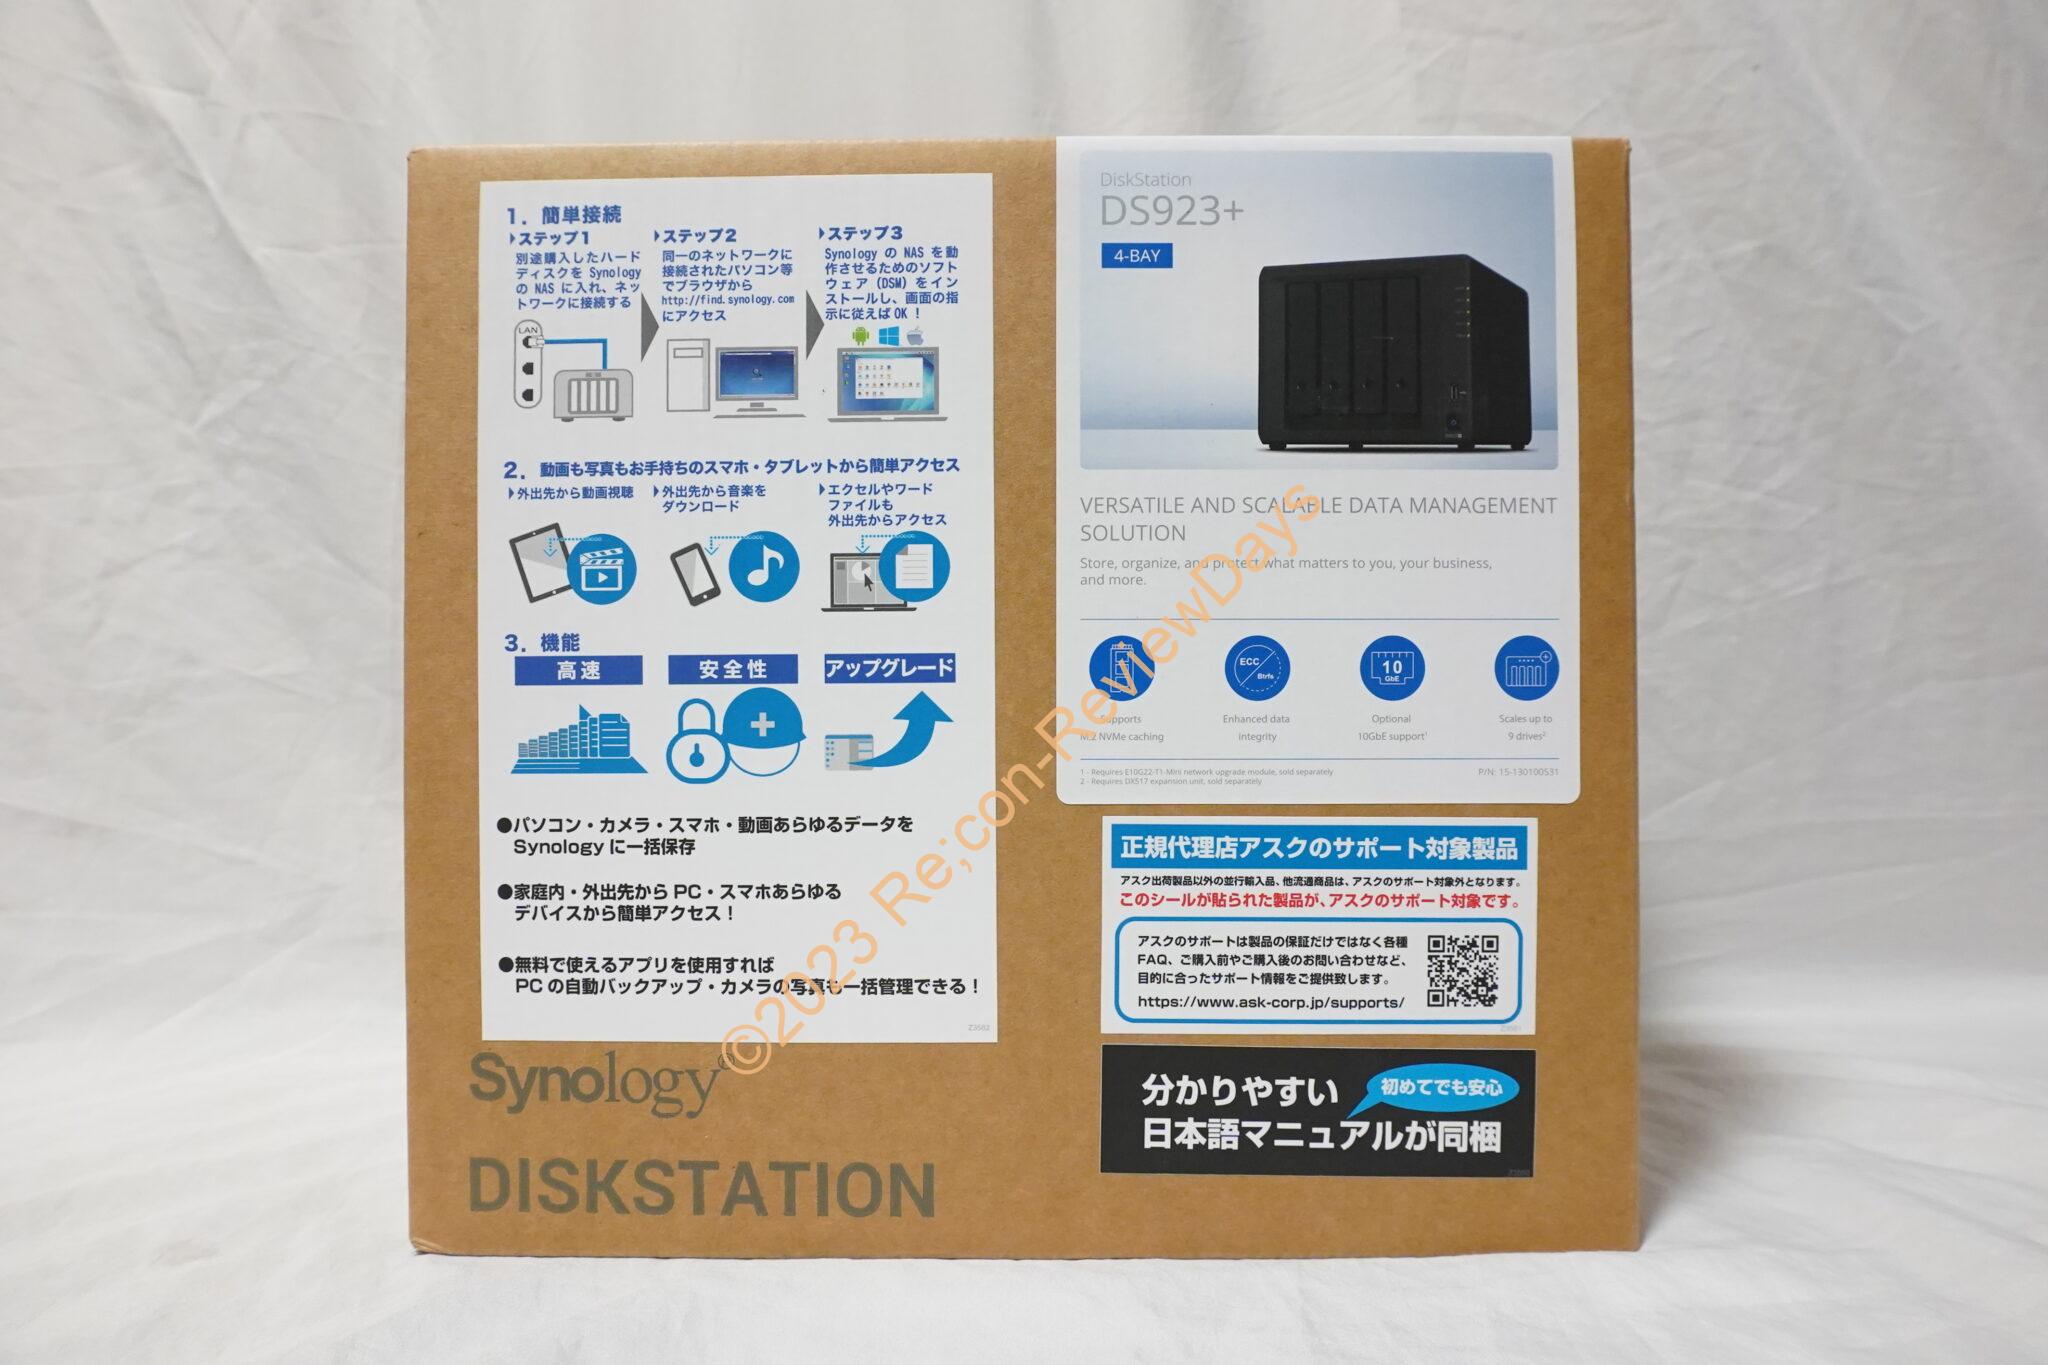 Synology DiskStation DS923+を購入しました #Synology #NAS #DS923 #DS923Plus